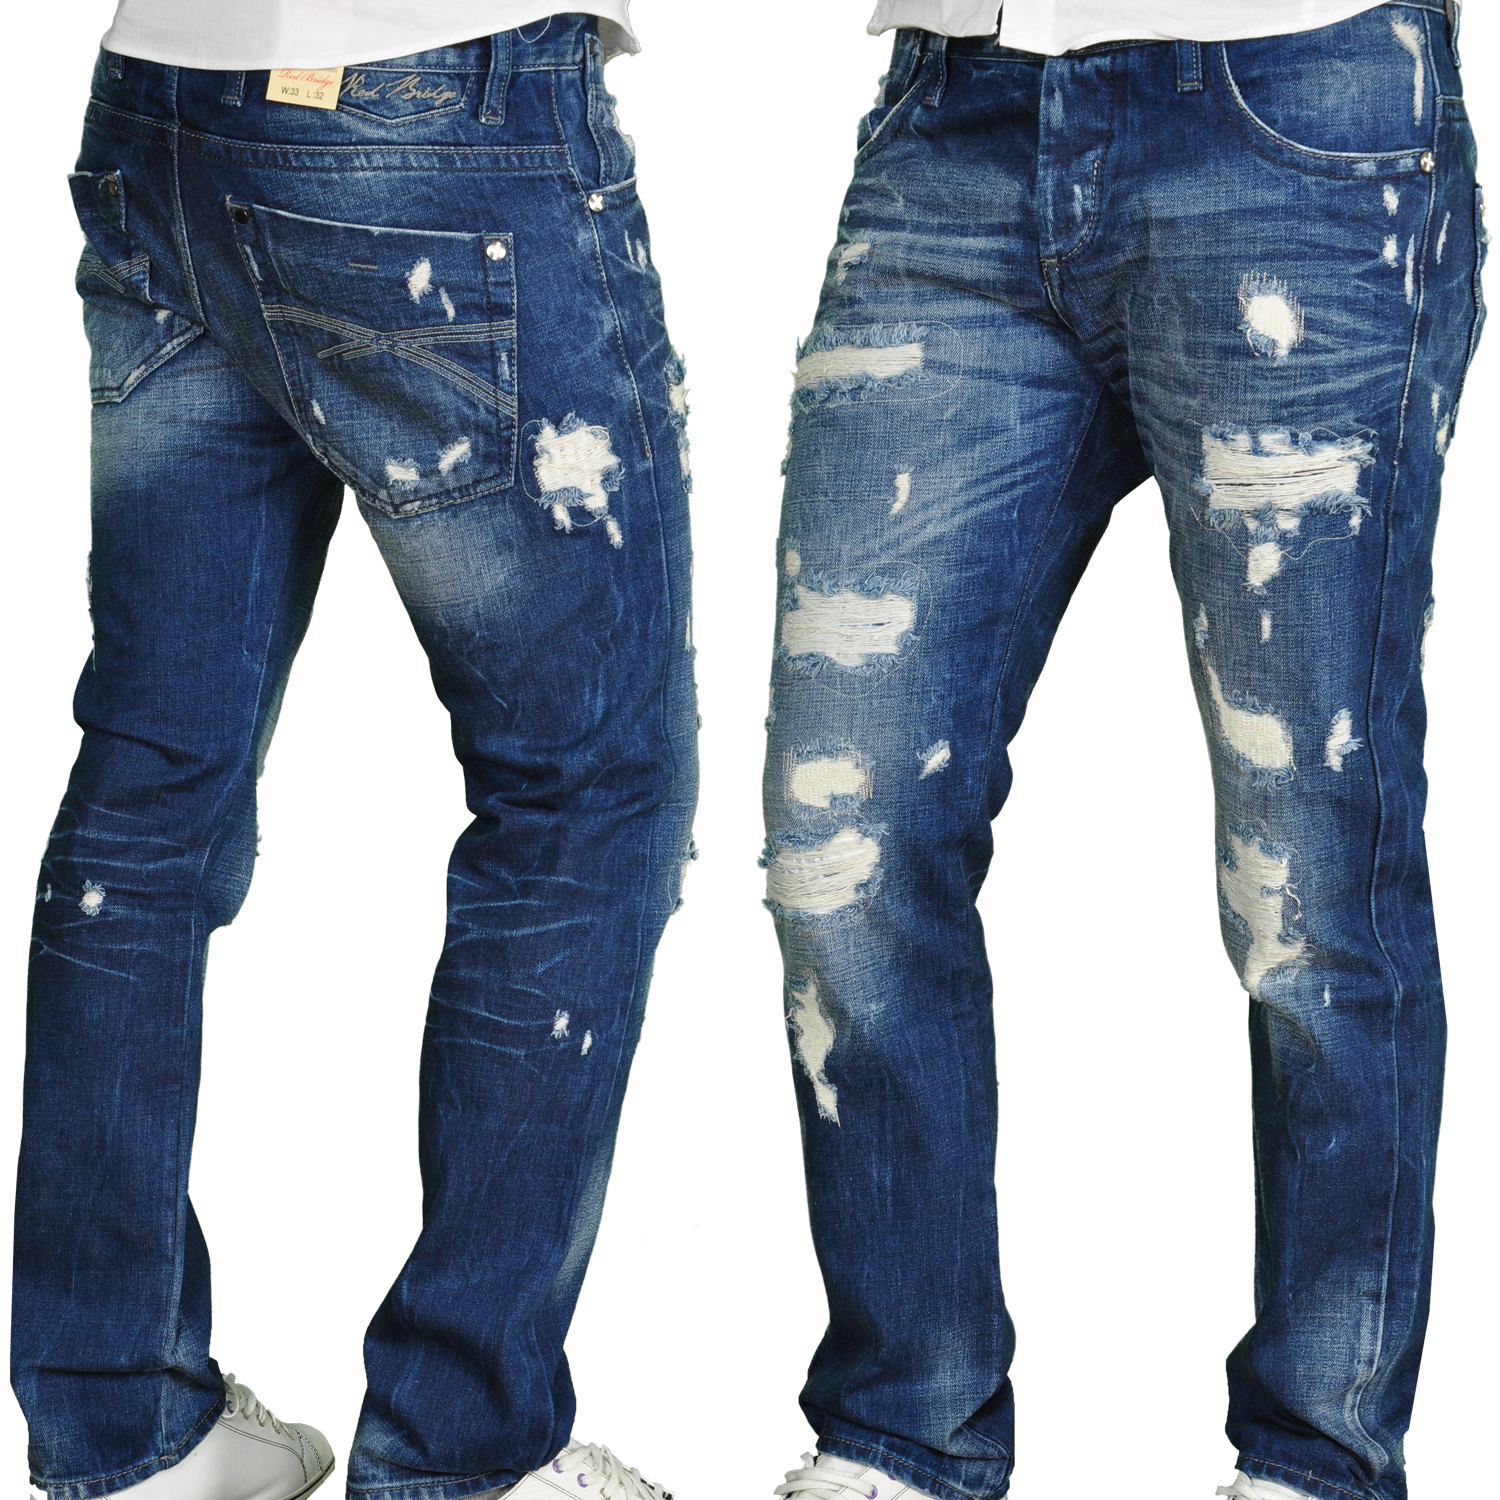 Jeans clipart mens jeans. Pant trousers free png